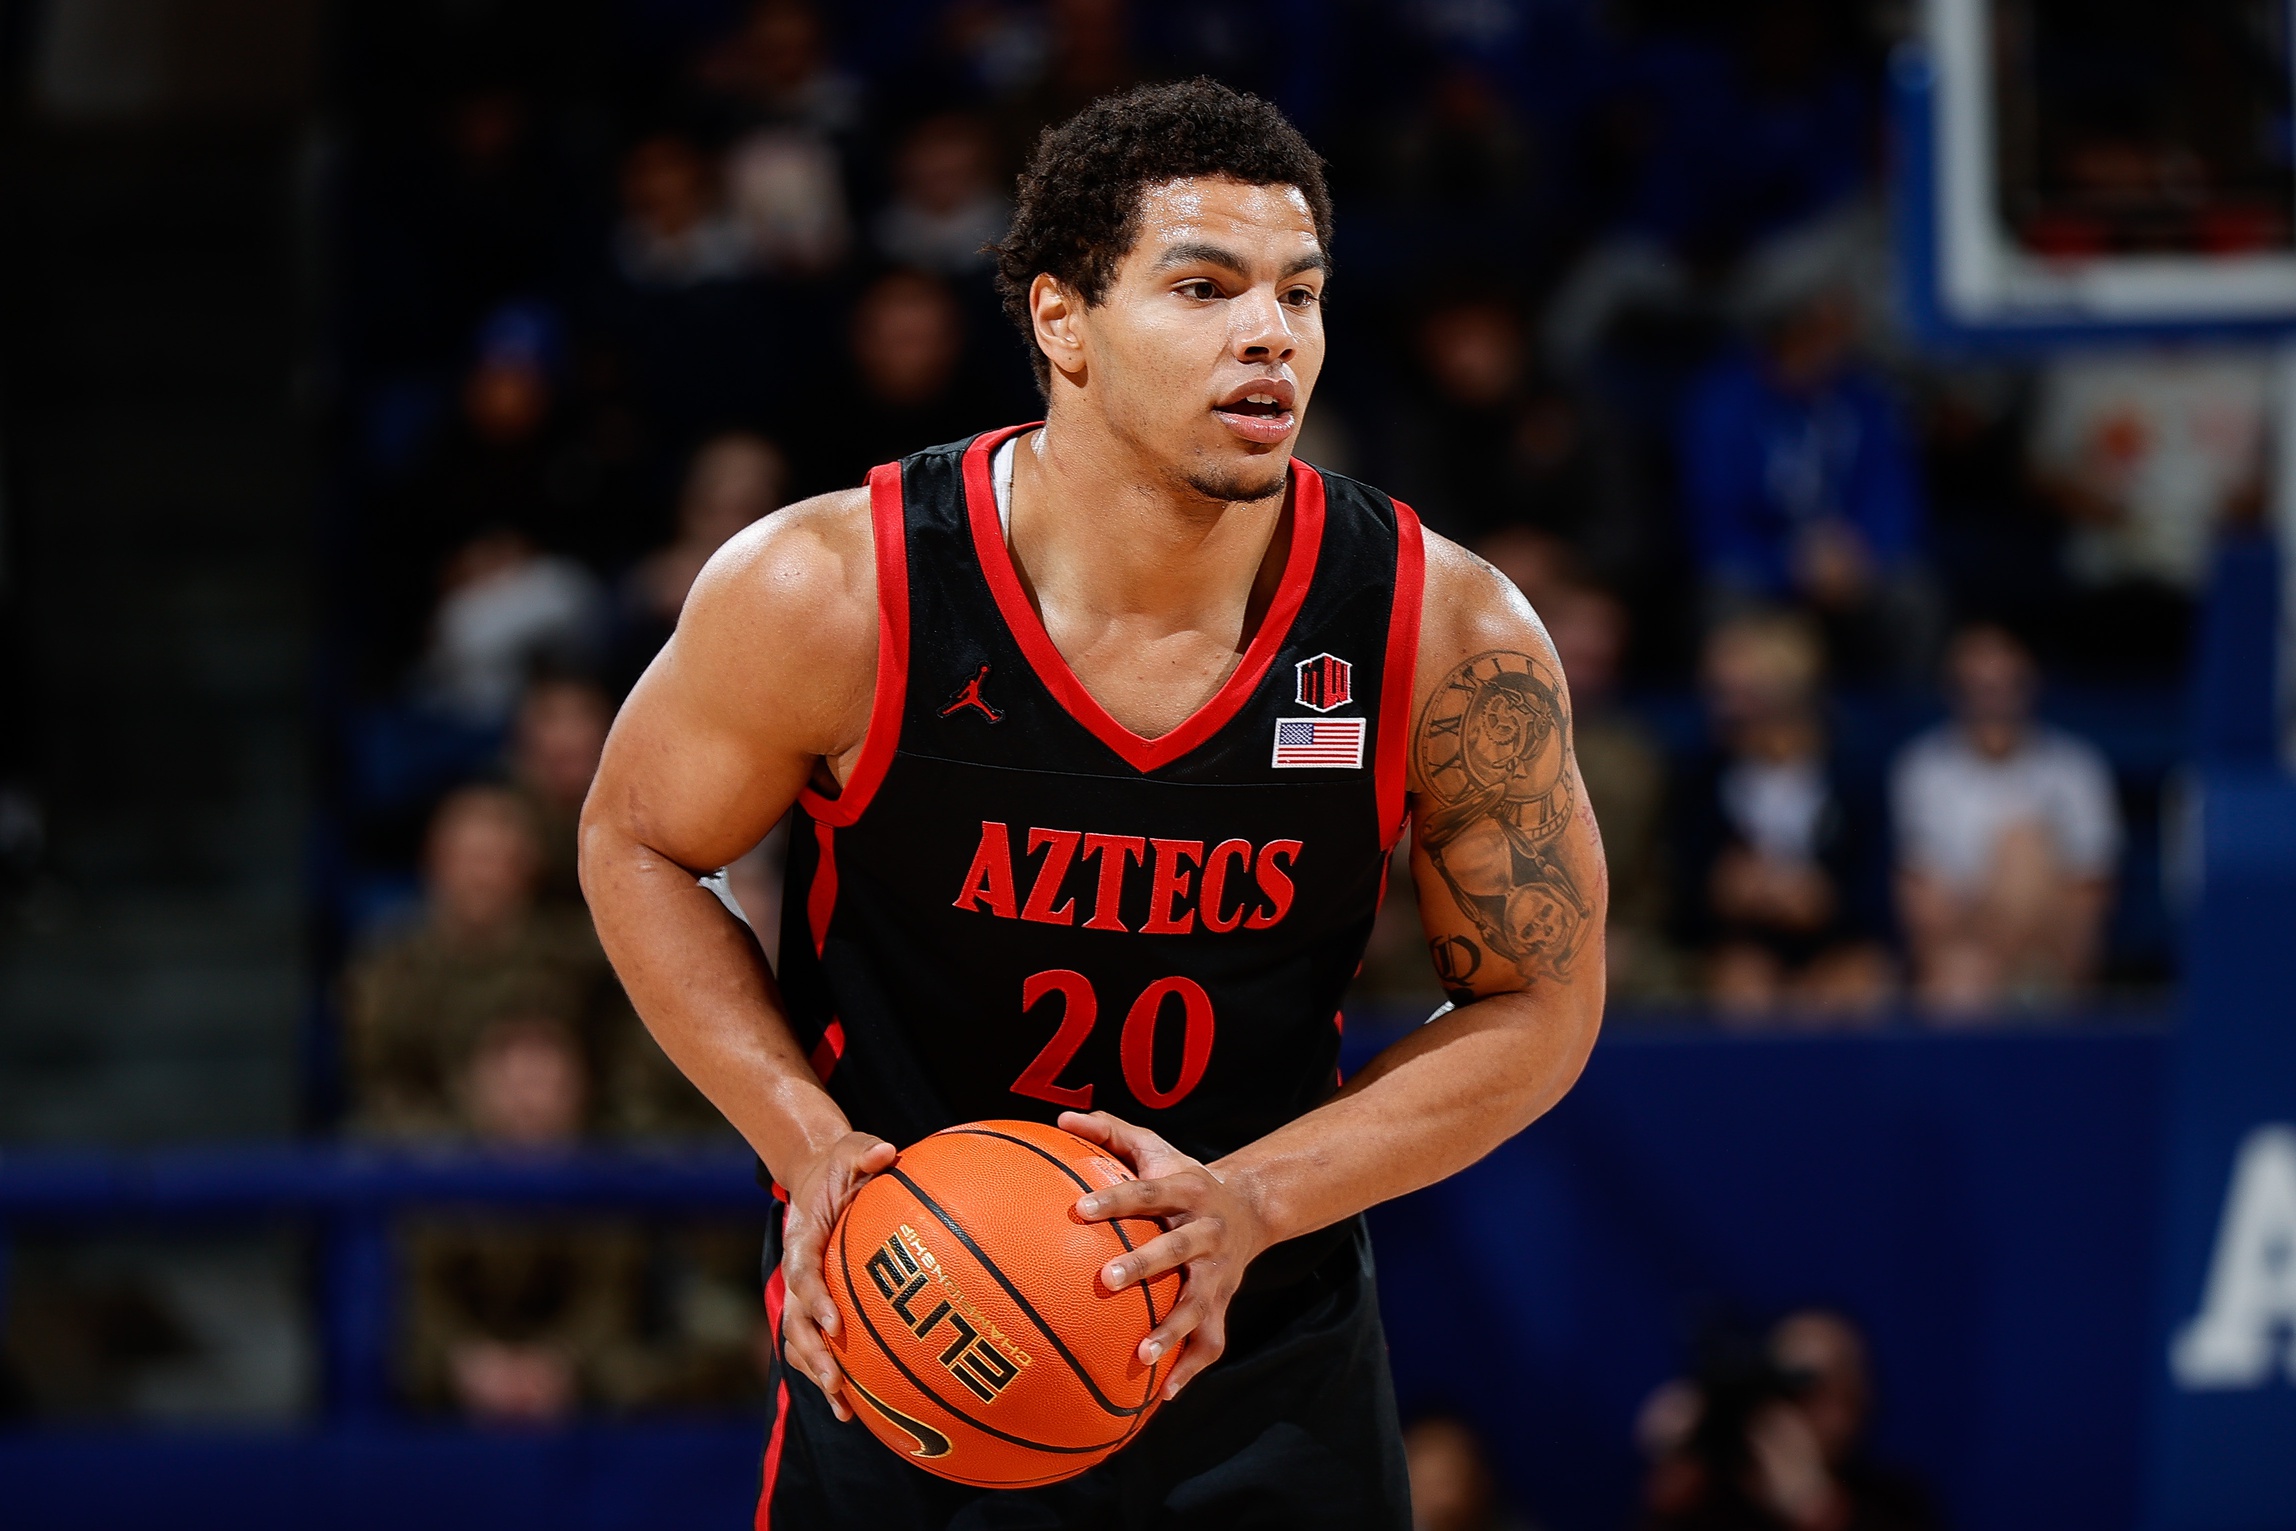 San Jose State Spartans vs San Diego State Aztecs Prediction, 3/10/2023 College Basketball Picks, Best Bets & Odds